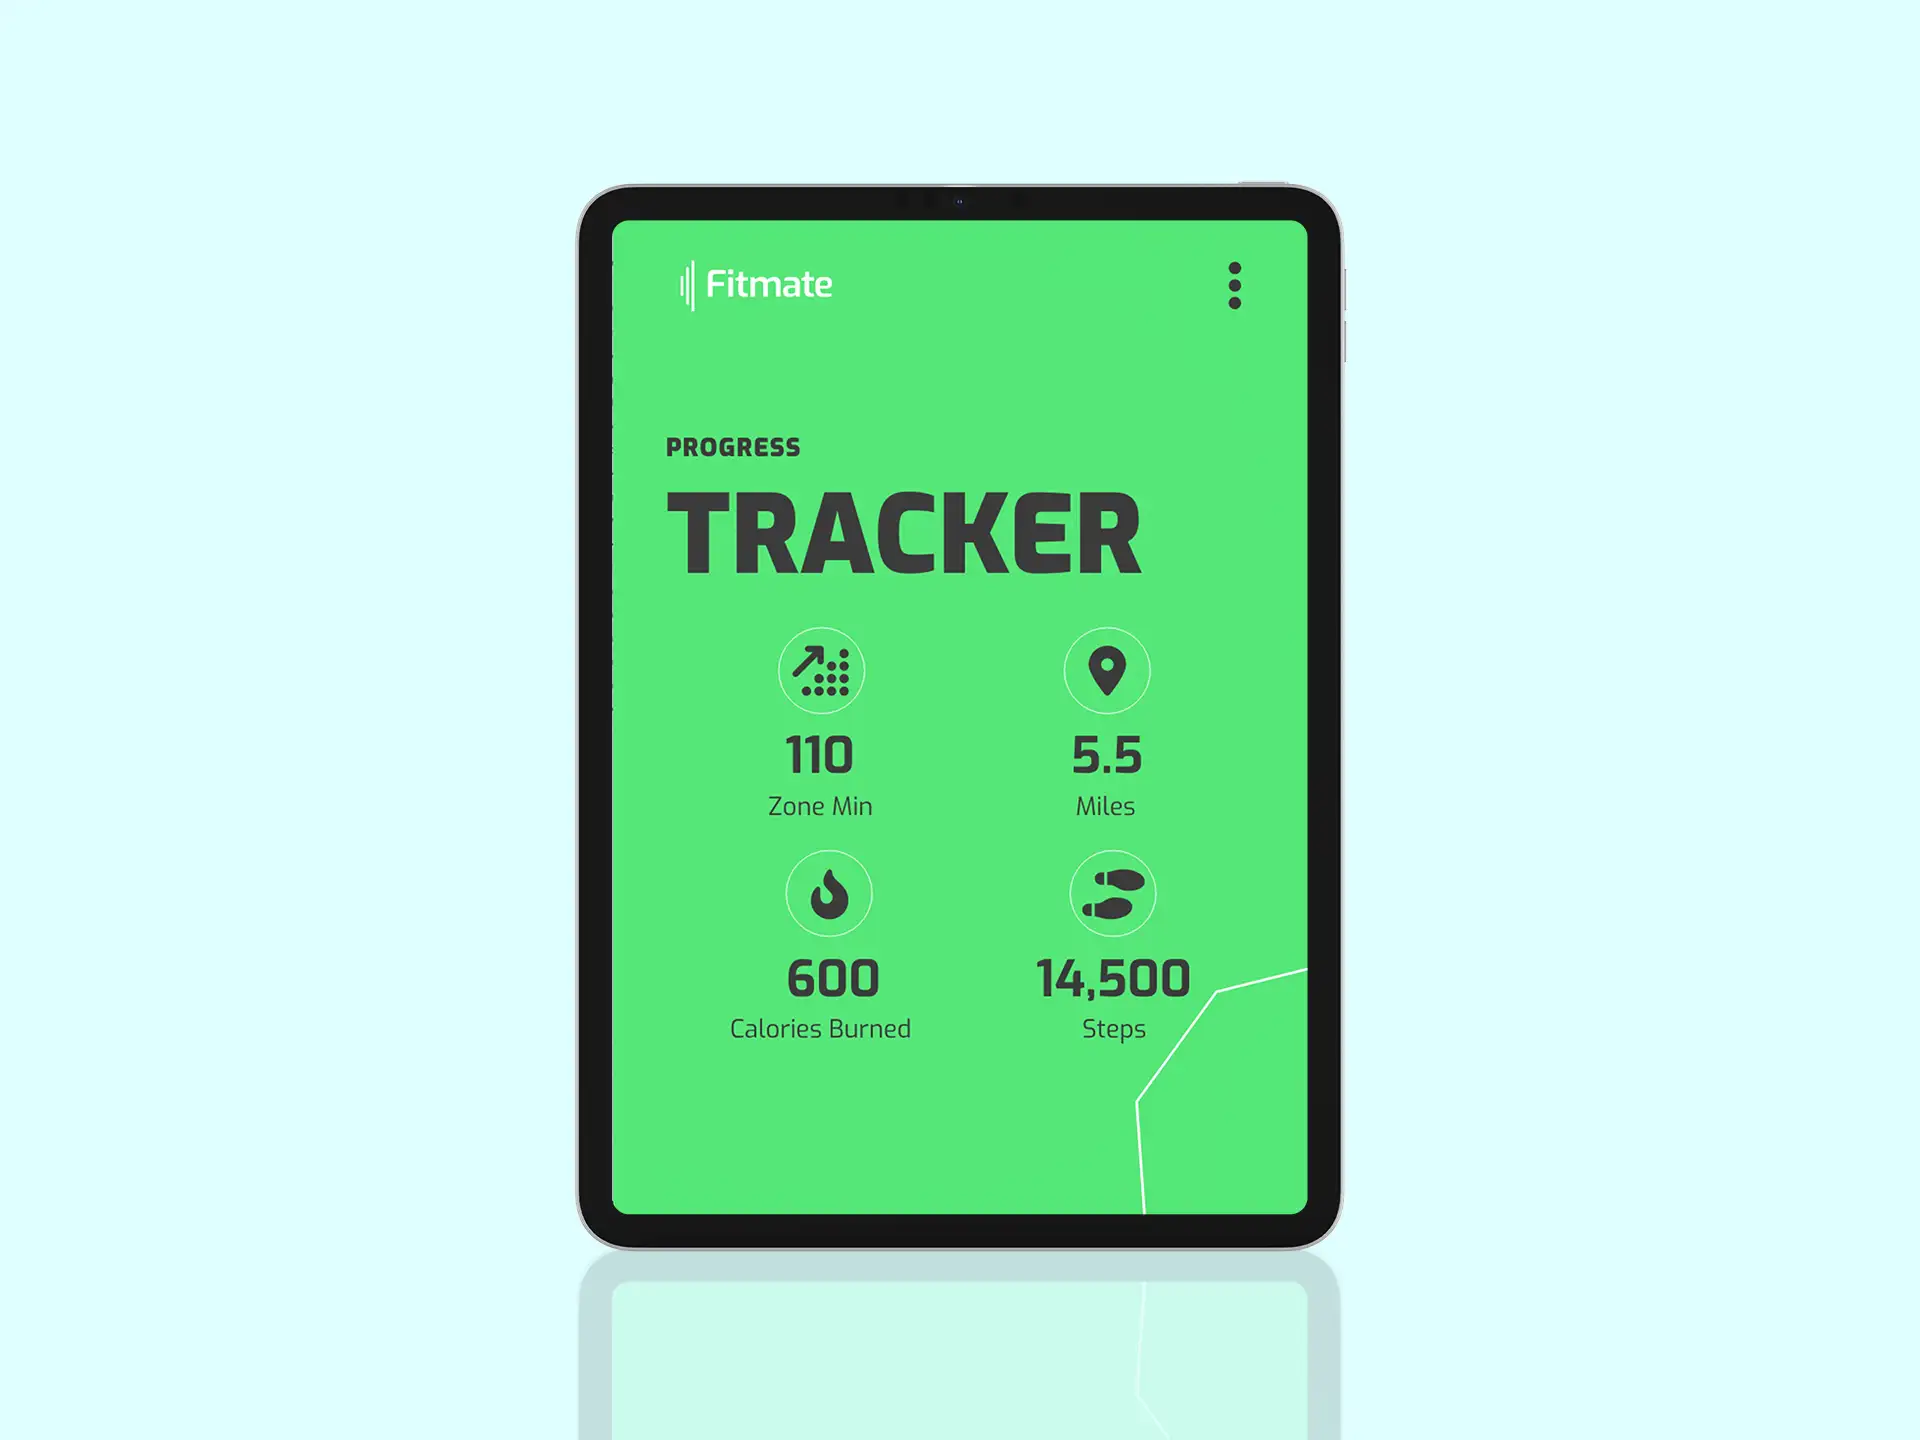 A "Progress Tracker" UX/UI screen featring custom iconography and custom results.